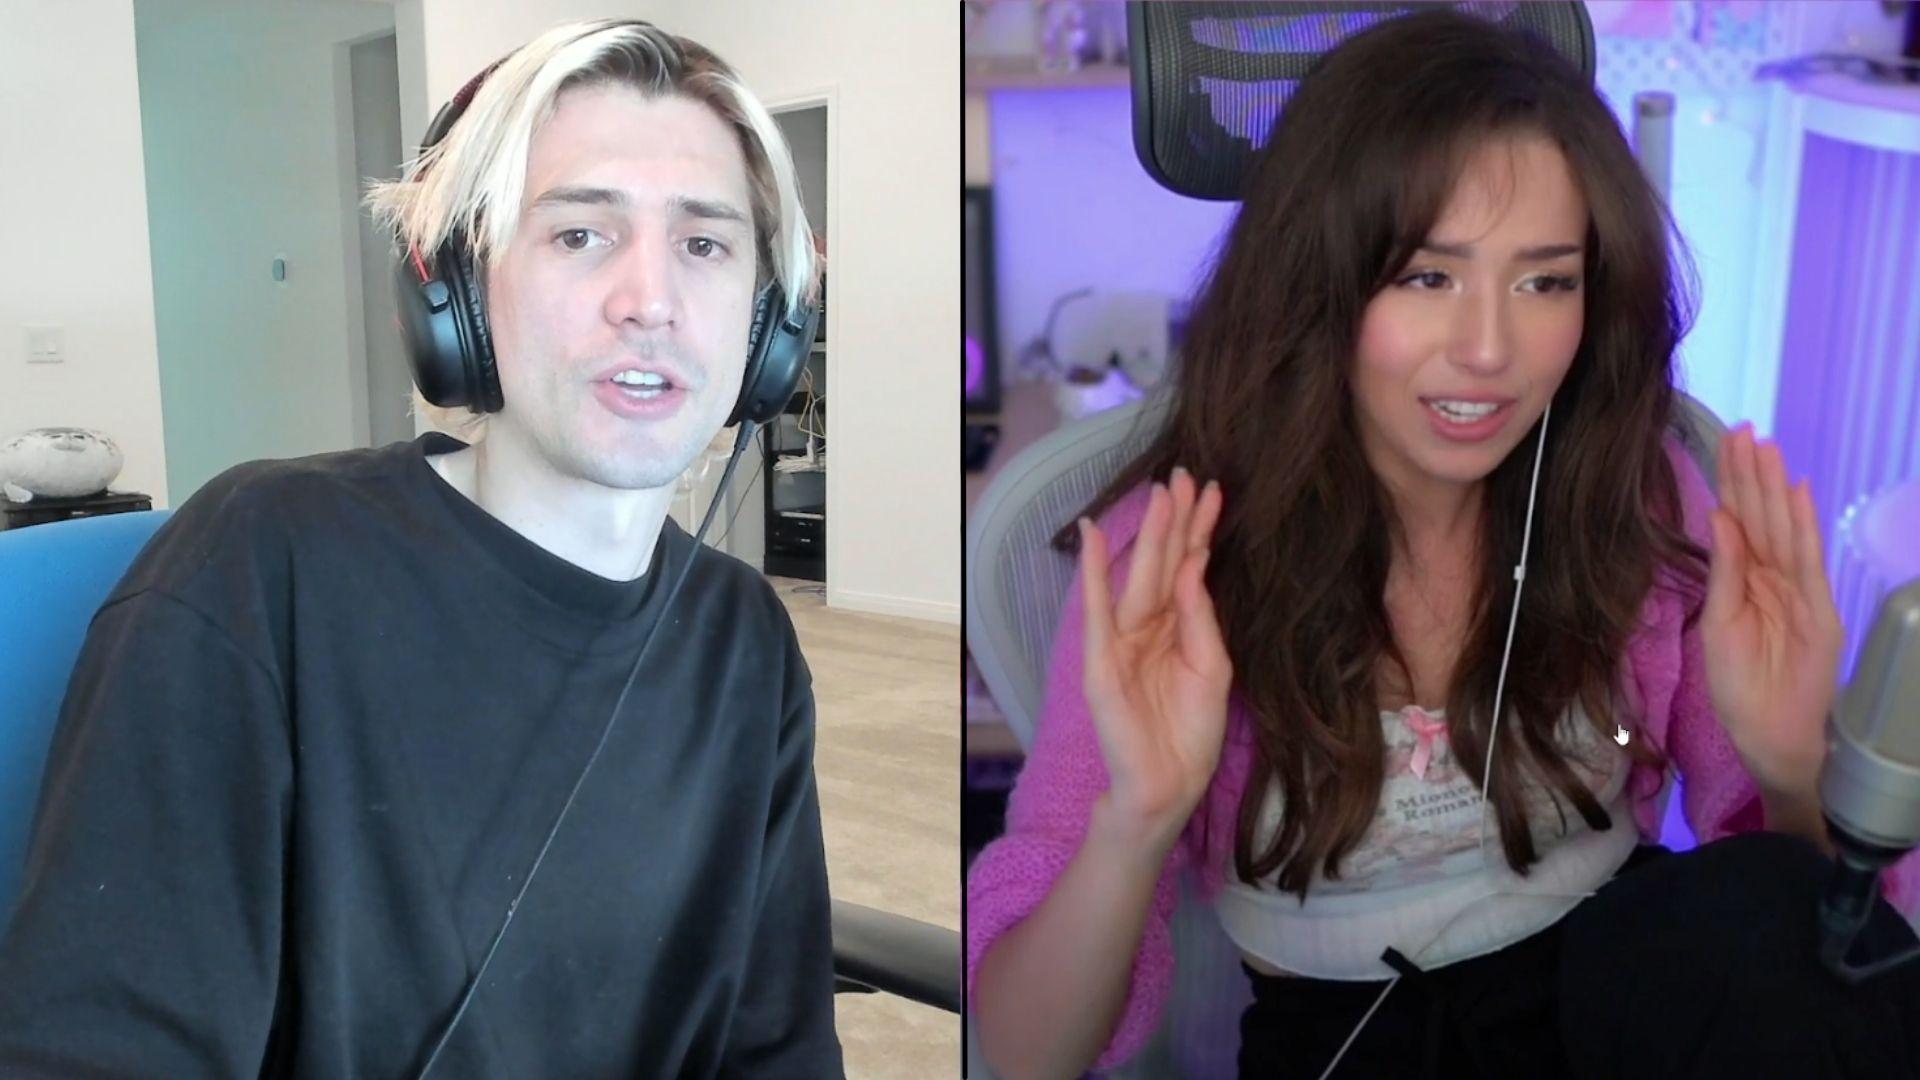 xQc and Pokimane side-by-side talking to camera on stream